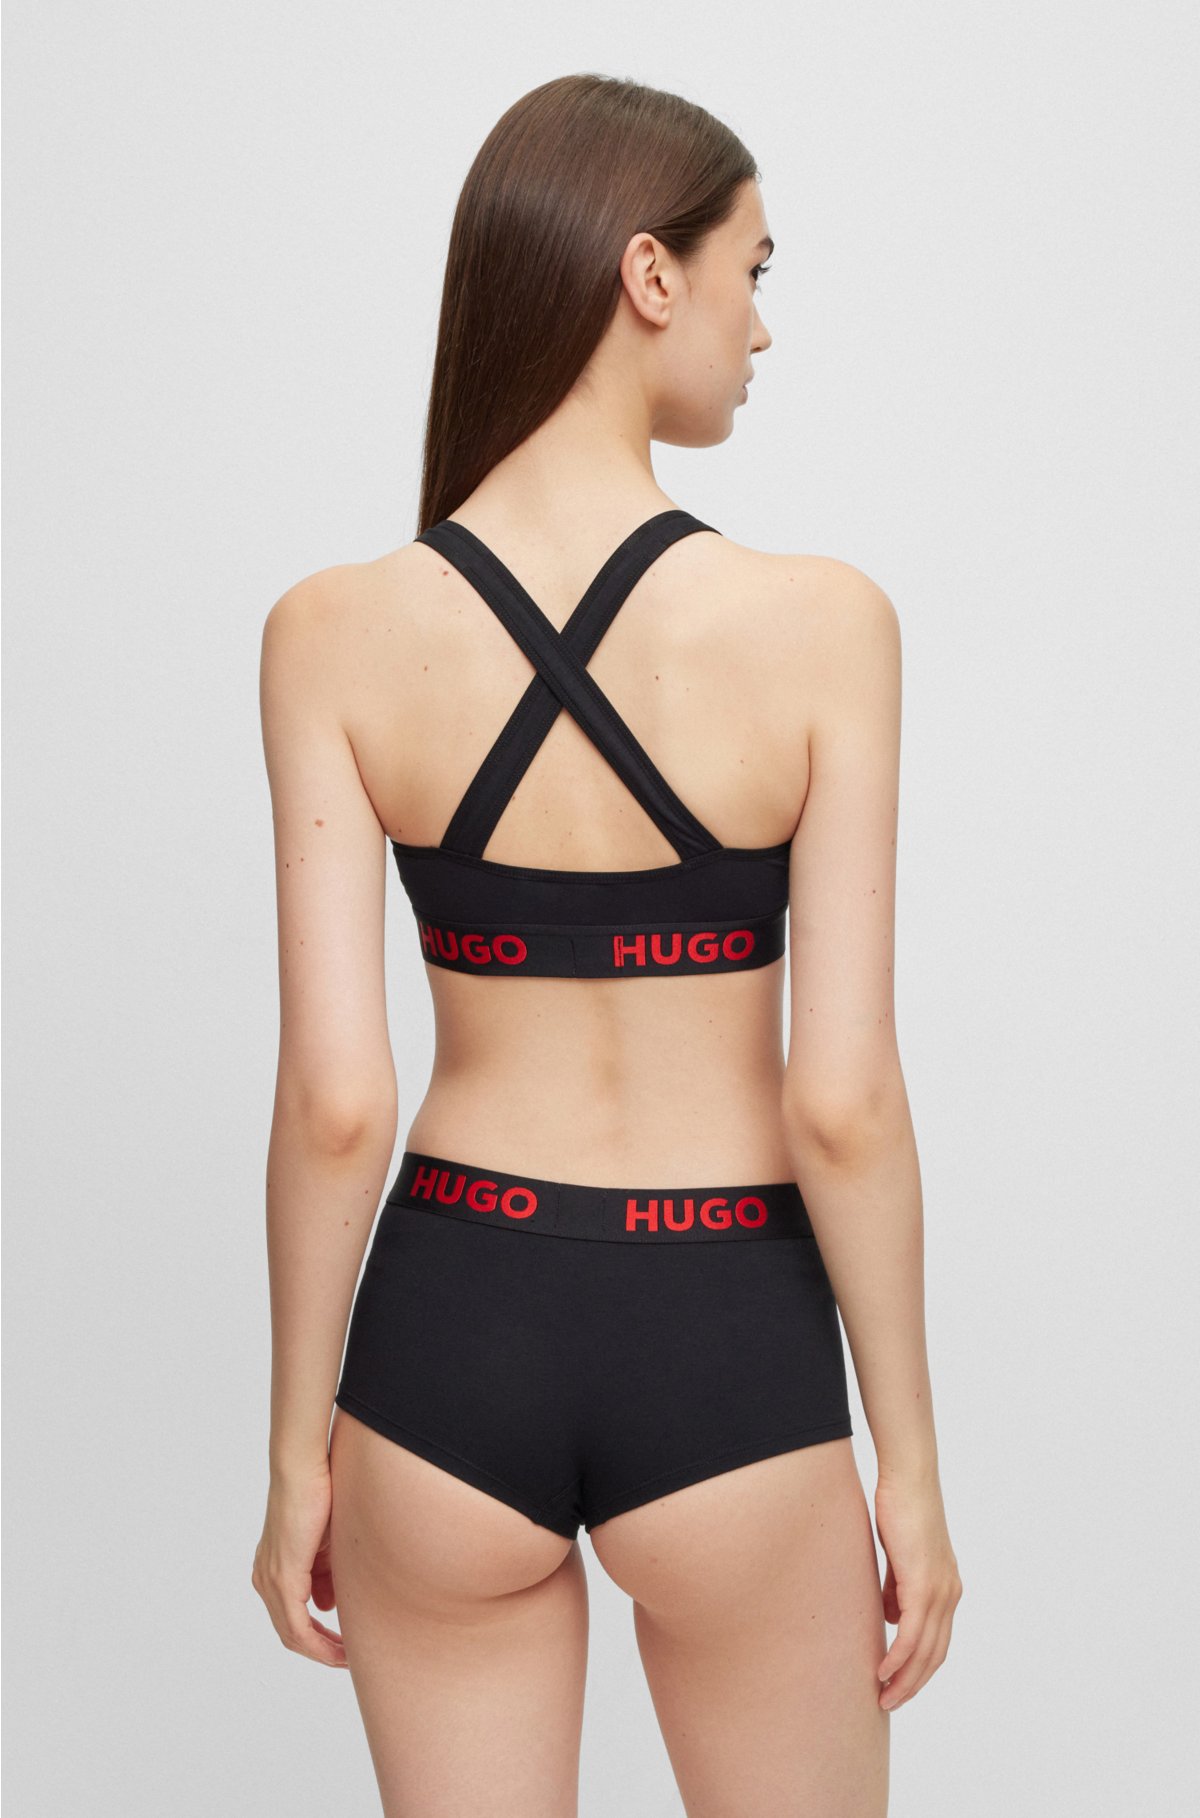 HUGO Sports repeat logos bra stretch cotton with in -